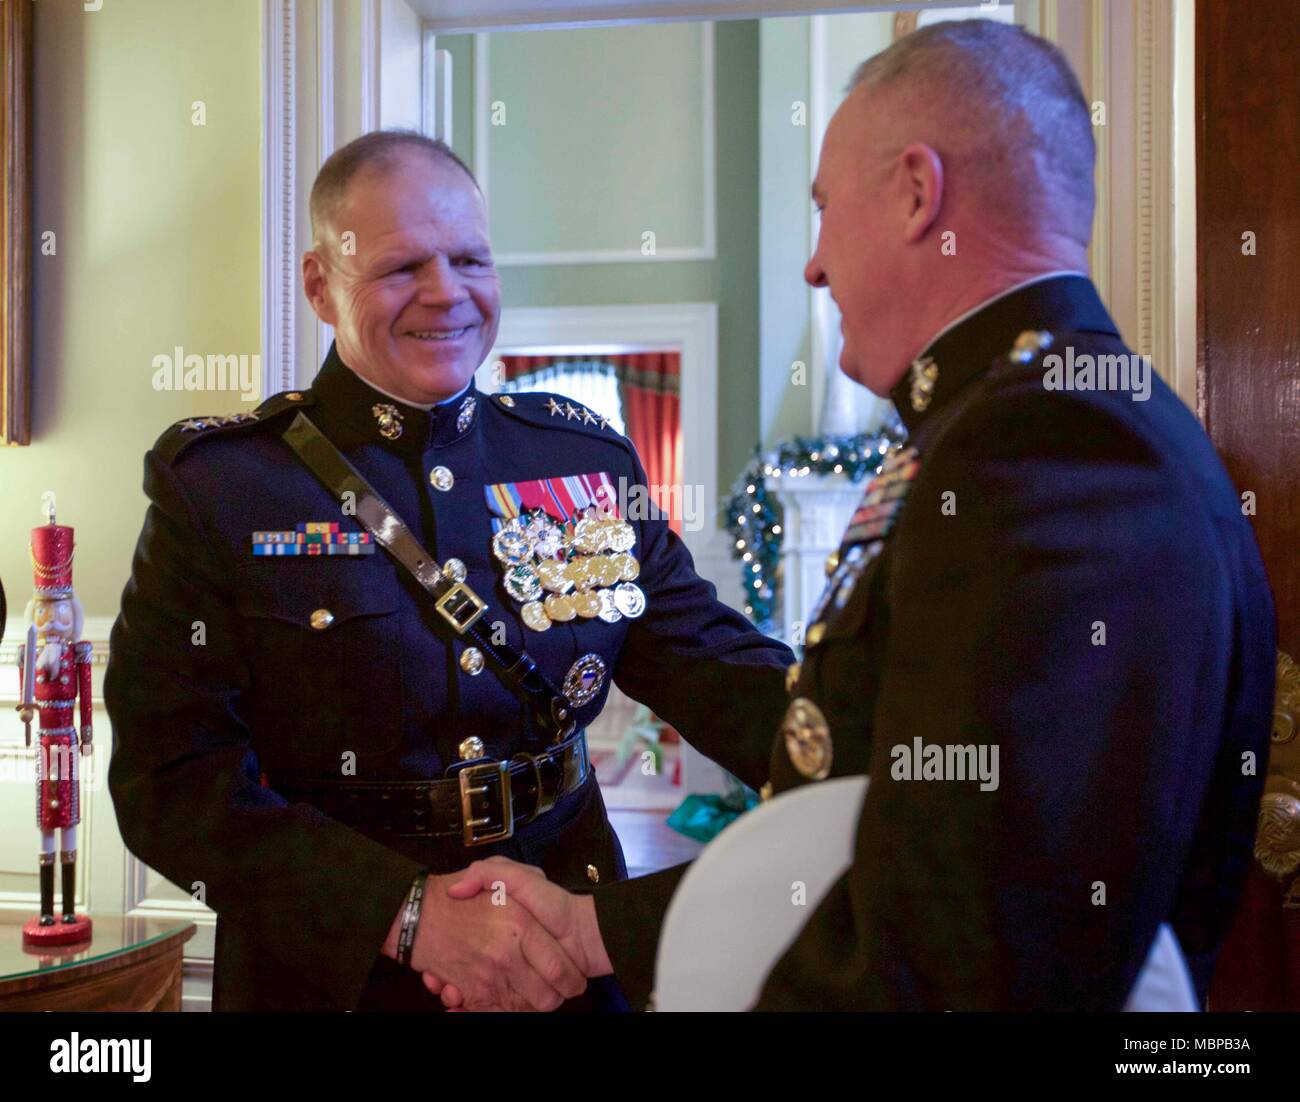 Commandant of the Marine Corps Gen. Robert B. Neller, left, shakes hands with Assistant Commandant of the Marine Corps, Gen. Glenn M. Walters before the 2018 Surprise Serenade at the Home of the Commandants, Washington, D.C., Jan. 1, 2018. The Surprise Serenade is a tradition that dates back to the mid-1800’s in which the U.S. Marine Band performs music for the Commandant of the Marine Corps at his home on New Years Day. (U.S. Marine Corps photo by Sgt. Olivia G. Ortiz) Stock Photo